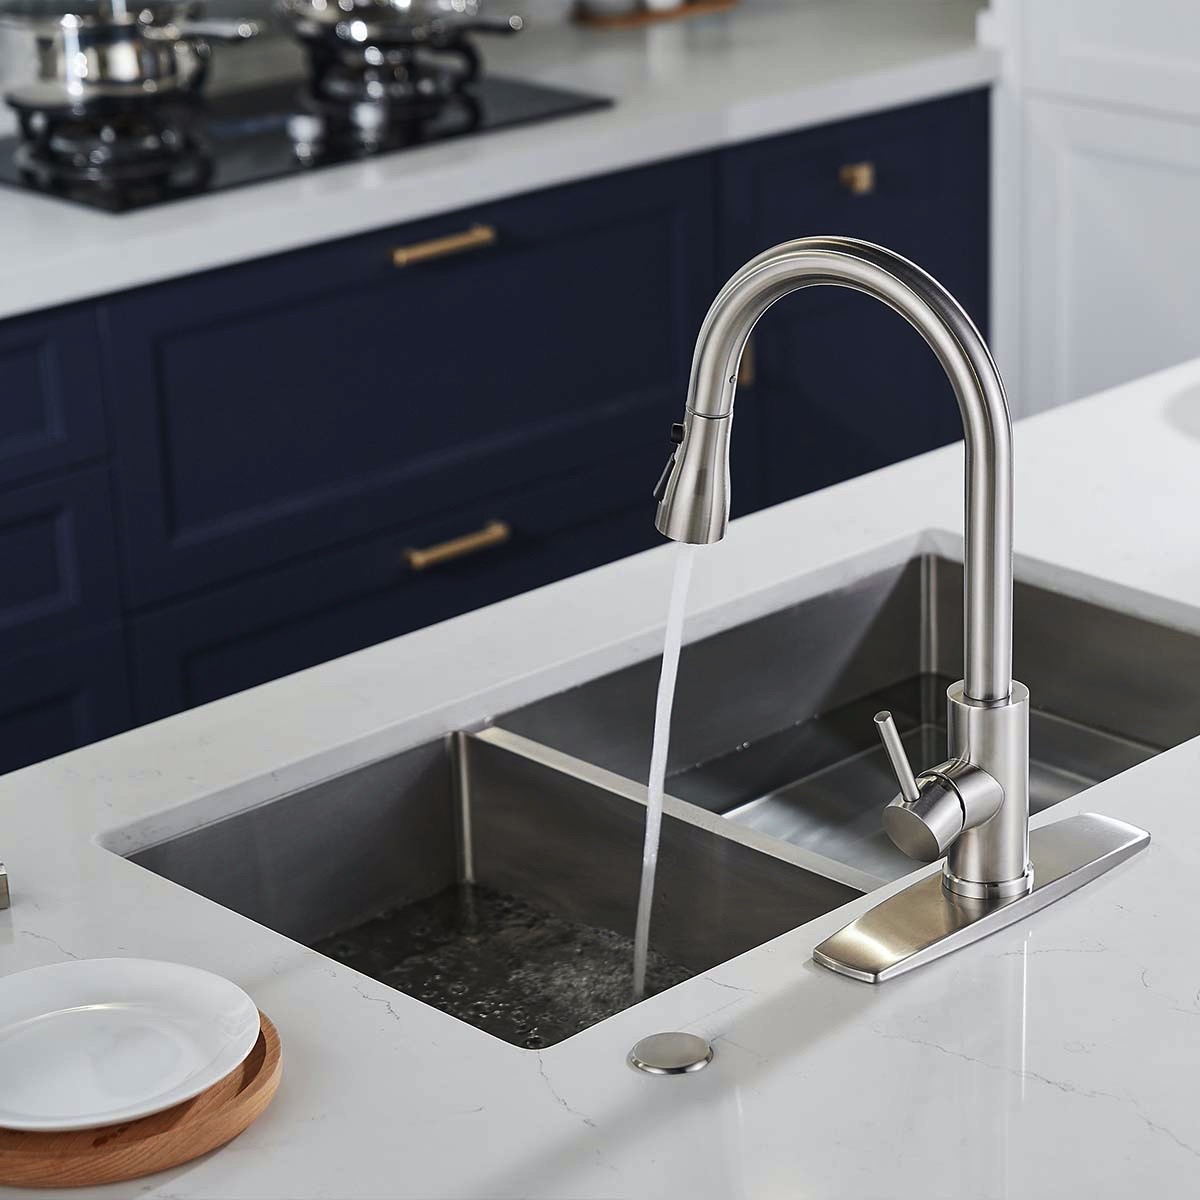 Forious Kitchen Faucet for Pull Down Sprayer Single Handle Sink Faucet Brushed Nickel in Kitchen - image 3 of 10